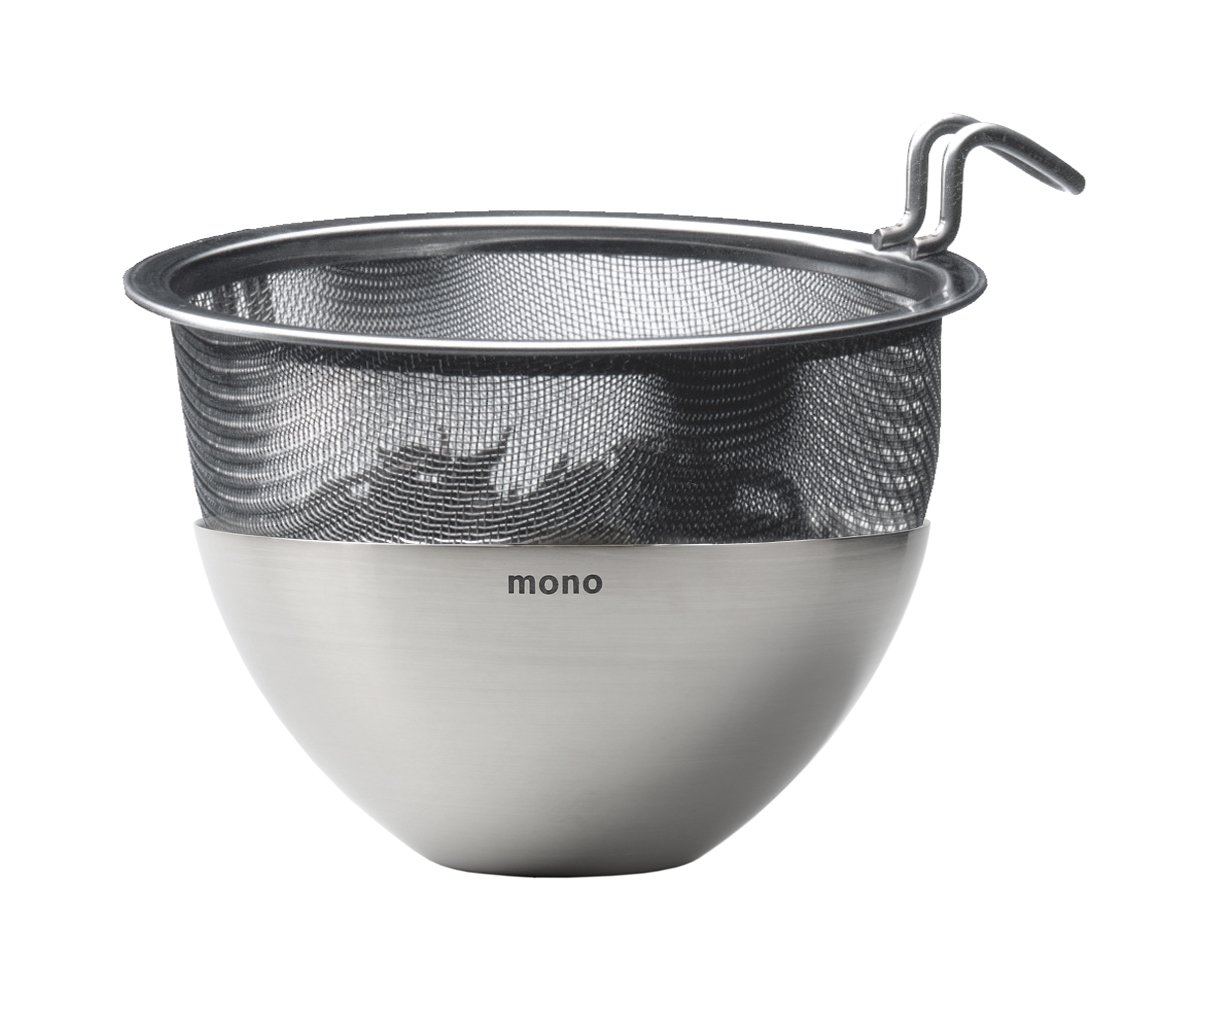 Mono strainer caddy tall with strainer.jpg